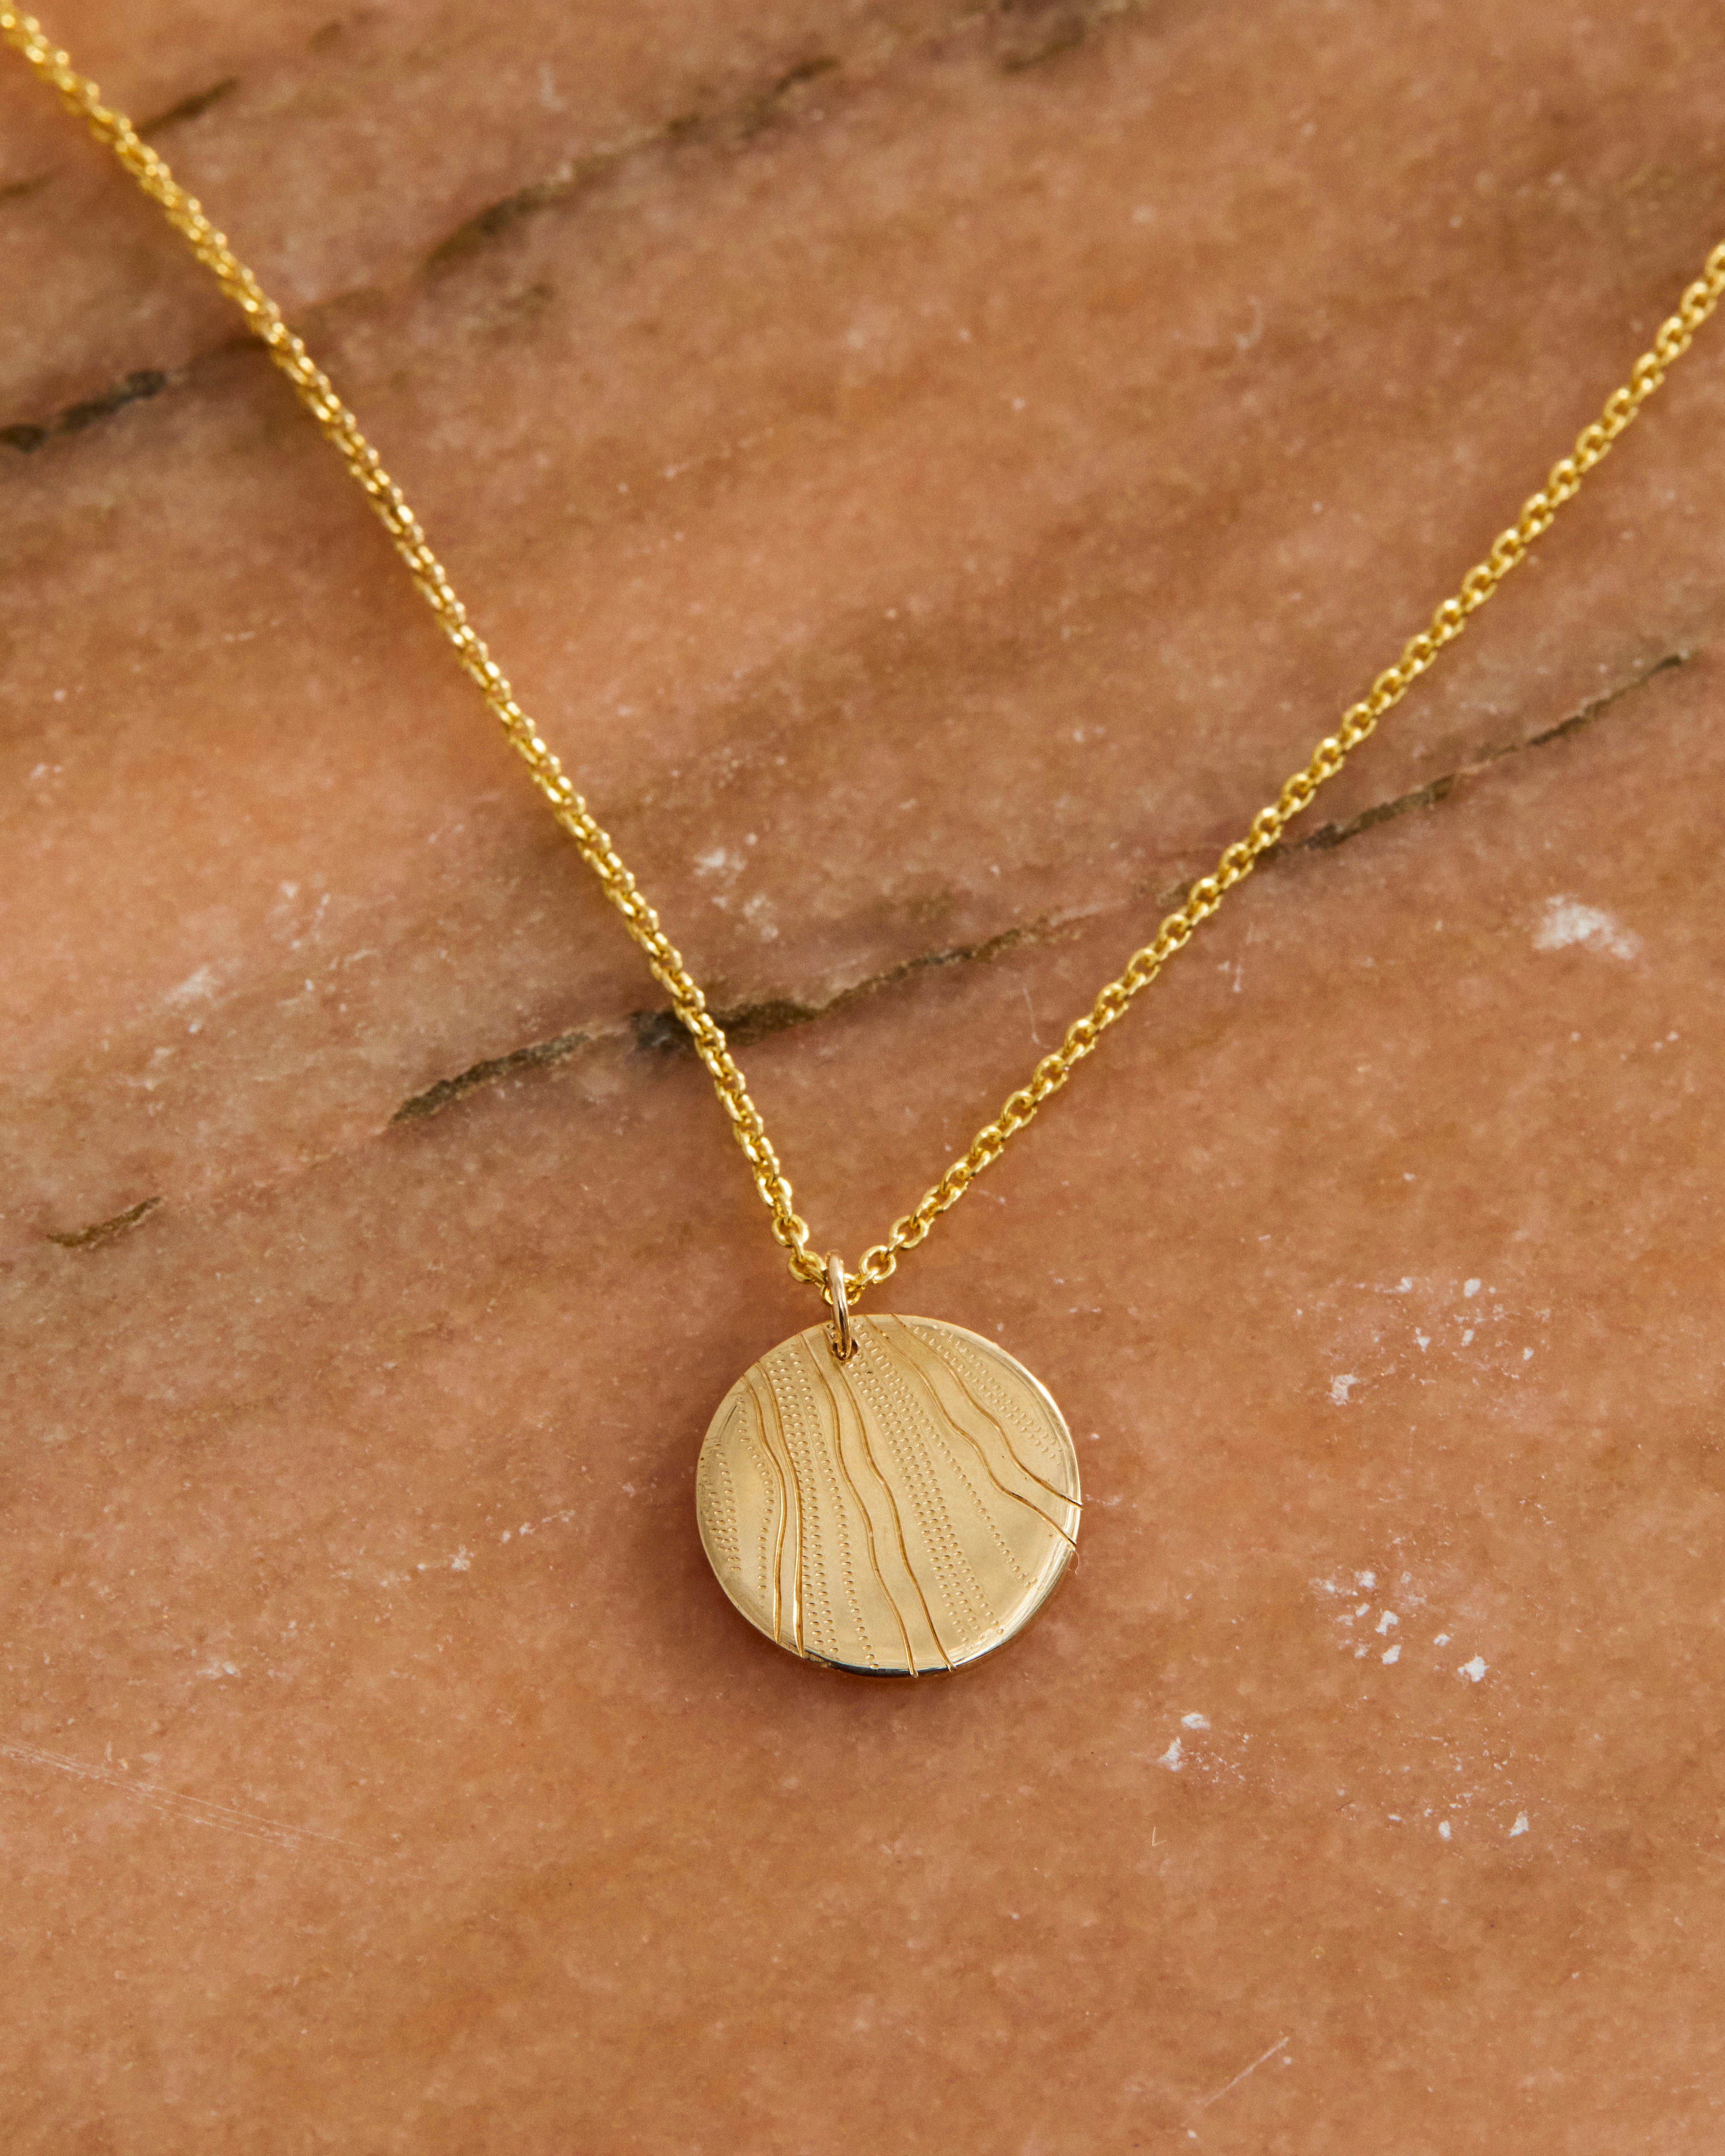 A close up on the Nhurali Necklace in yellow gold.